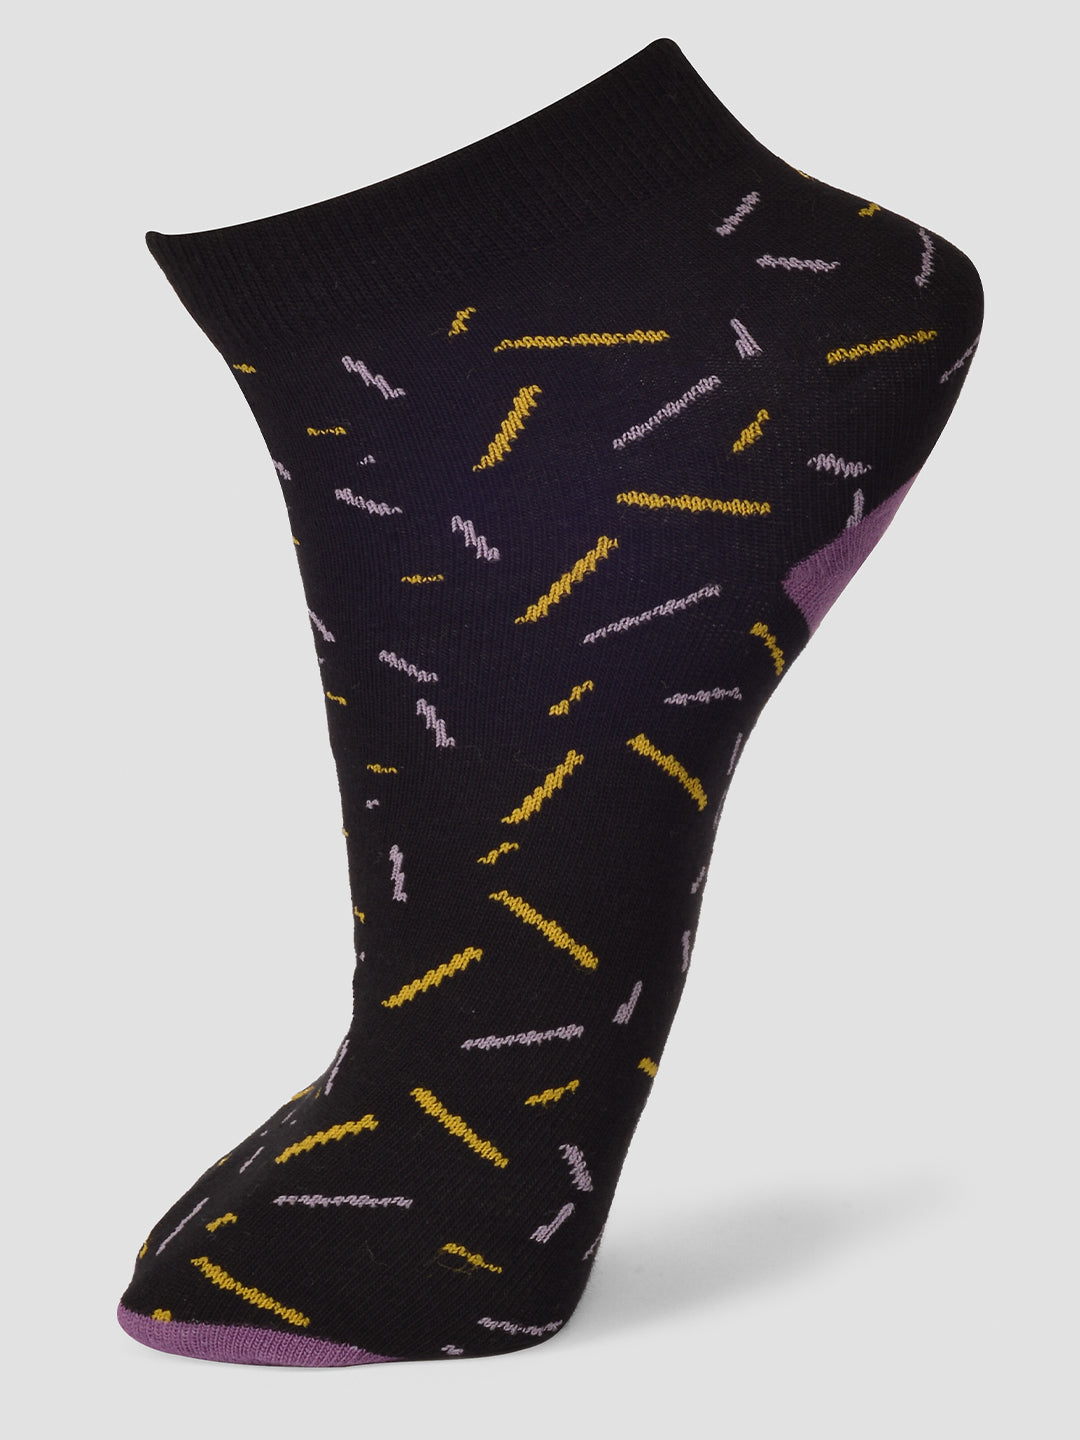 FRENCHIE PO5 GEOMETRIC ALL OVER DESIGN ANKLE LENGTH CUT ASSORTED COTTON SOCKS 01